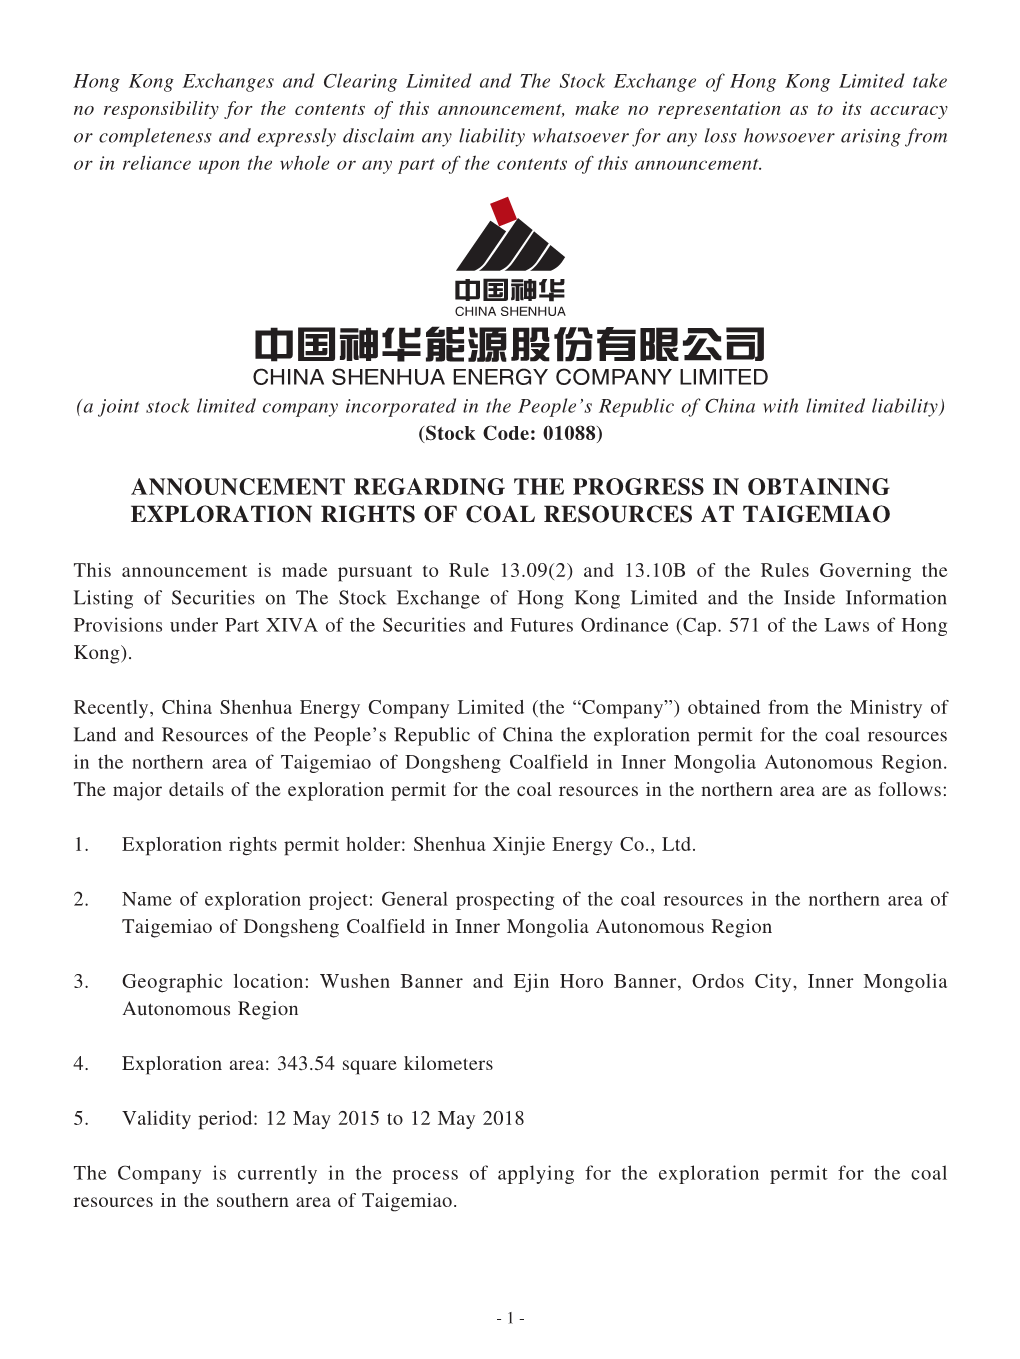 Announcement Regarding the Progress in Obtaining Exploration Rights of Coal Resources at Taigemiao